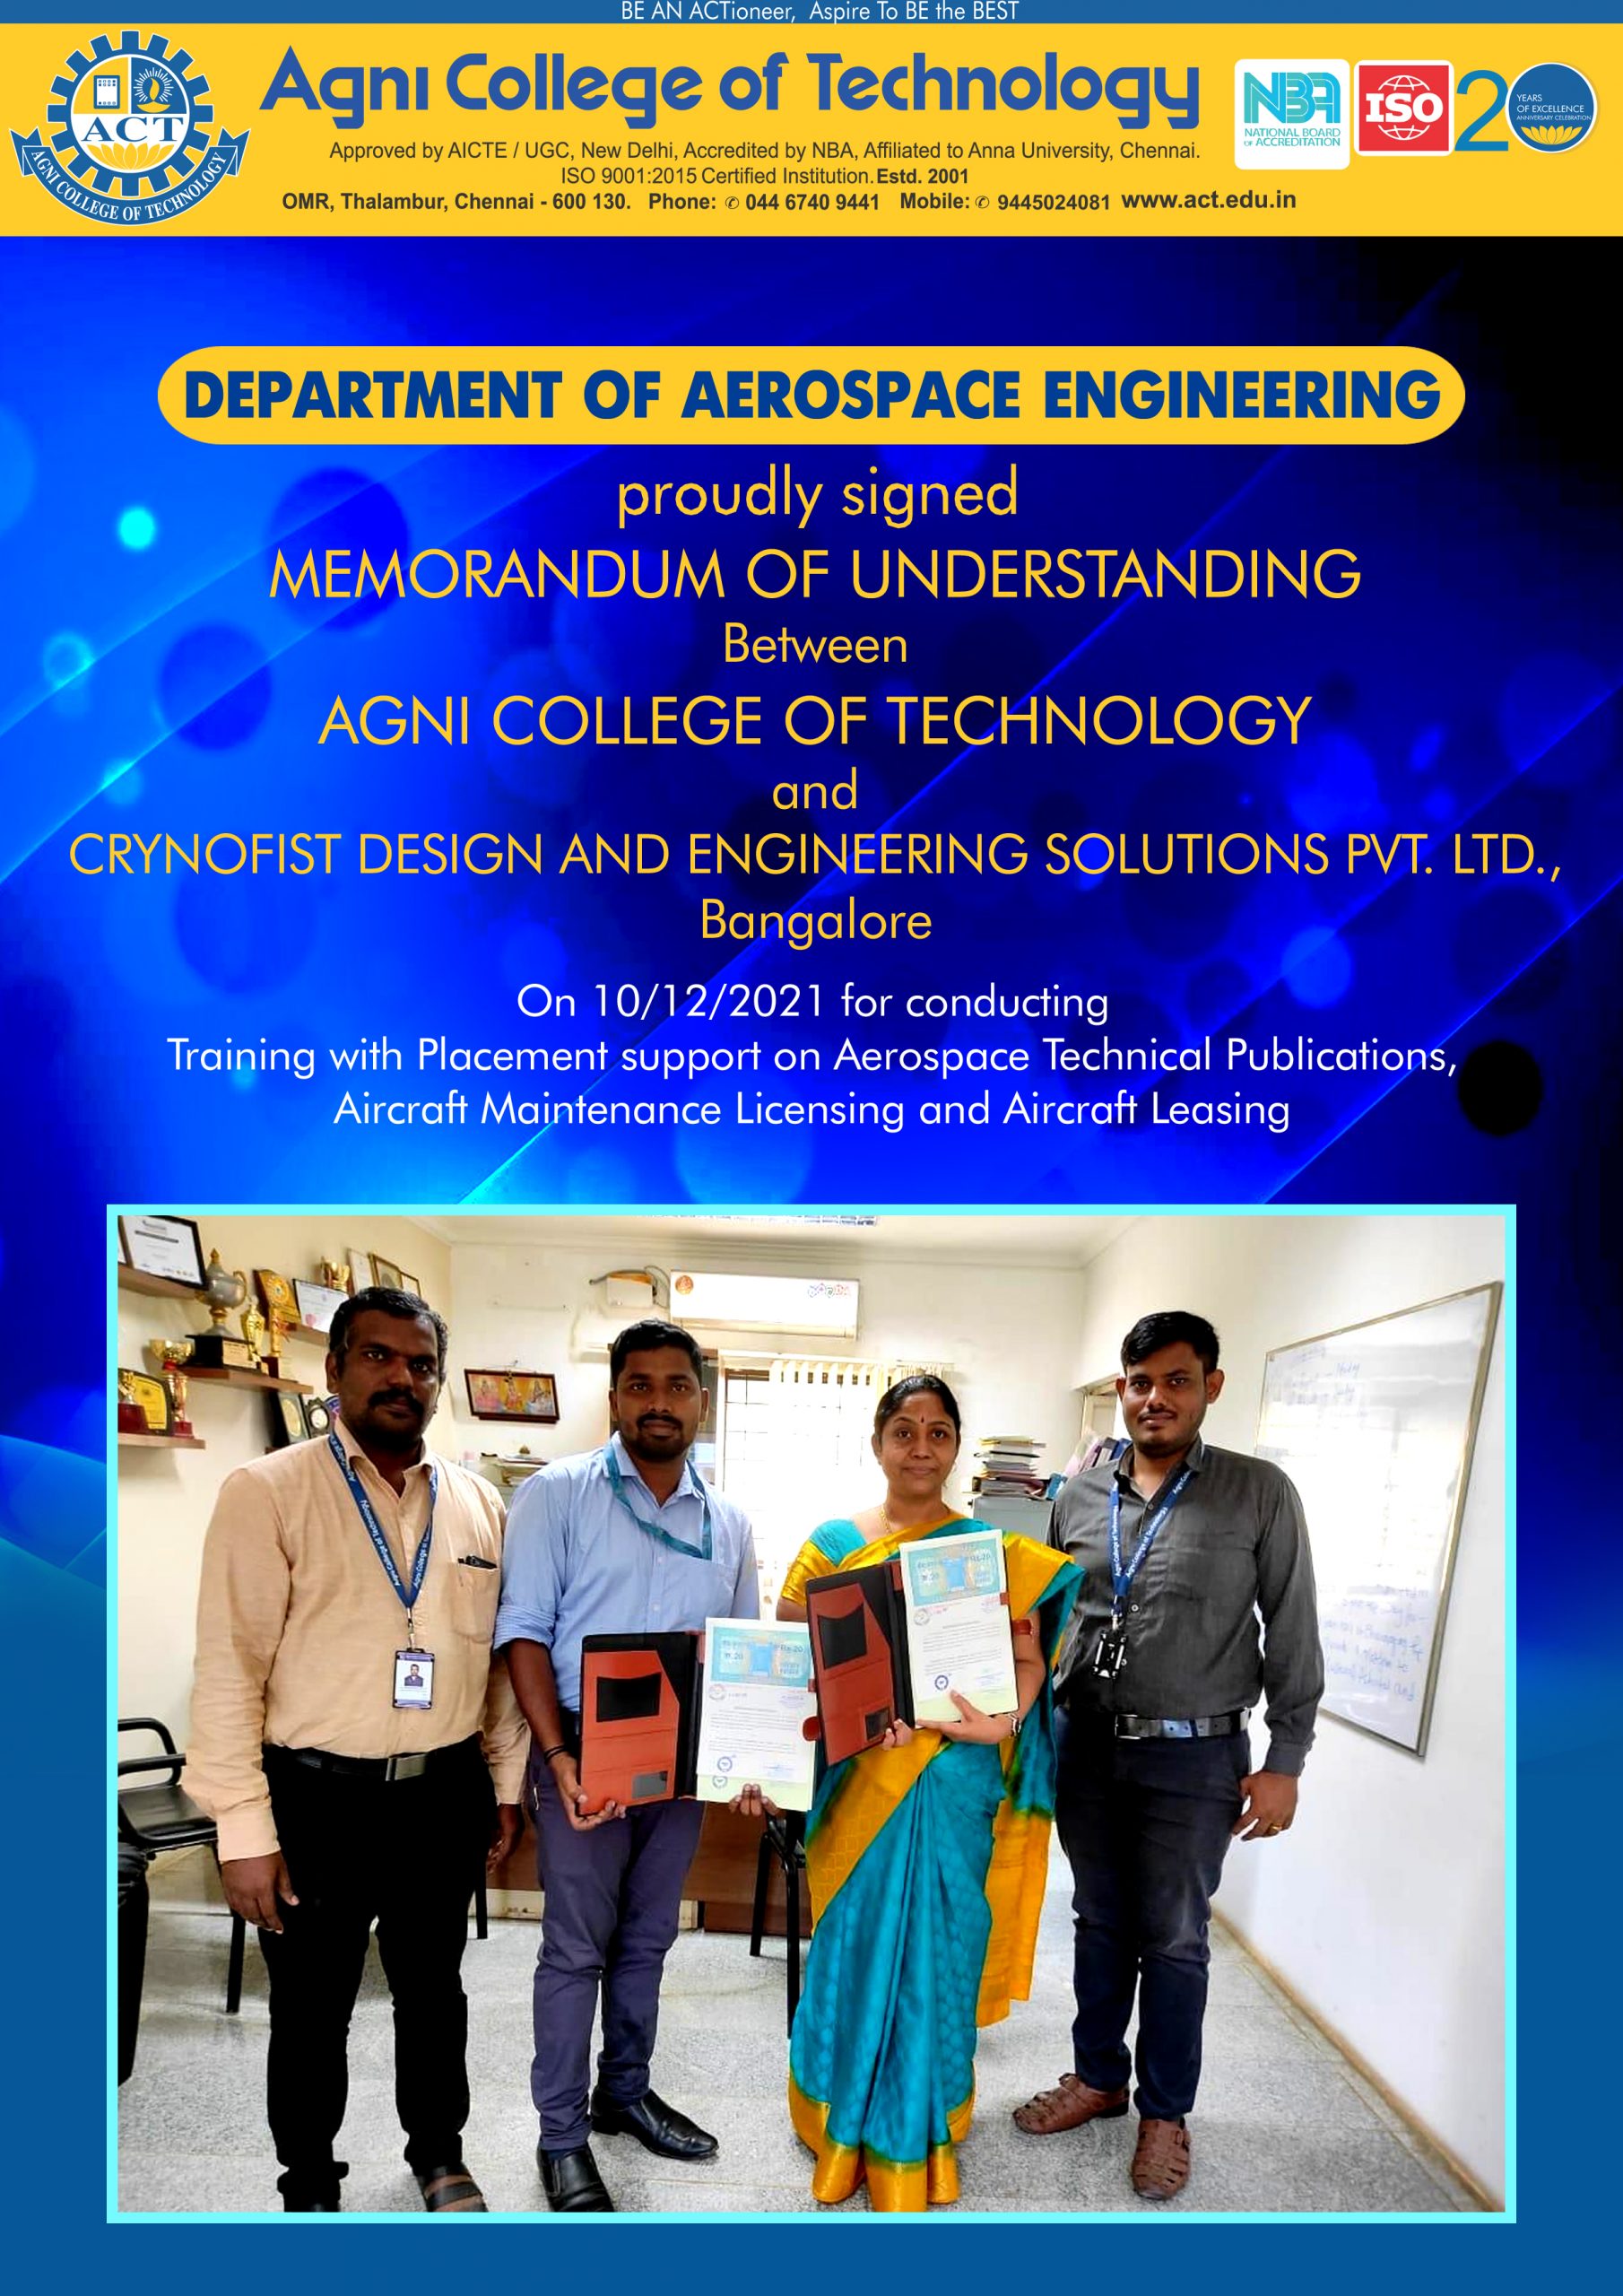 MOU Signed between ACT and Crynofist Design and Engineering solutions Pvt. Ltd., Bangalore